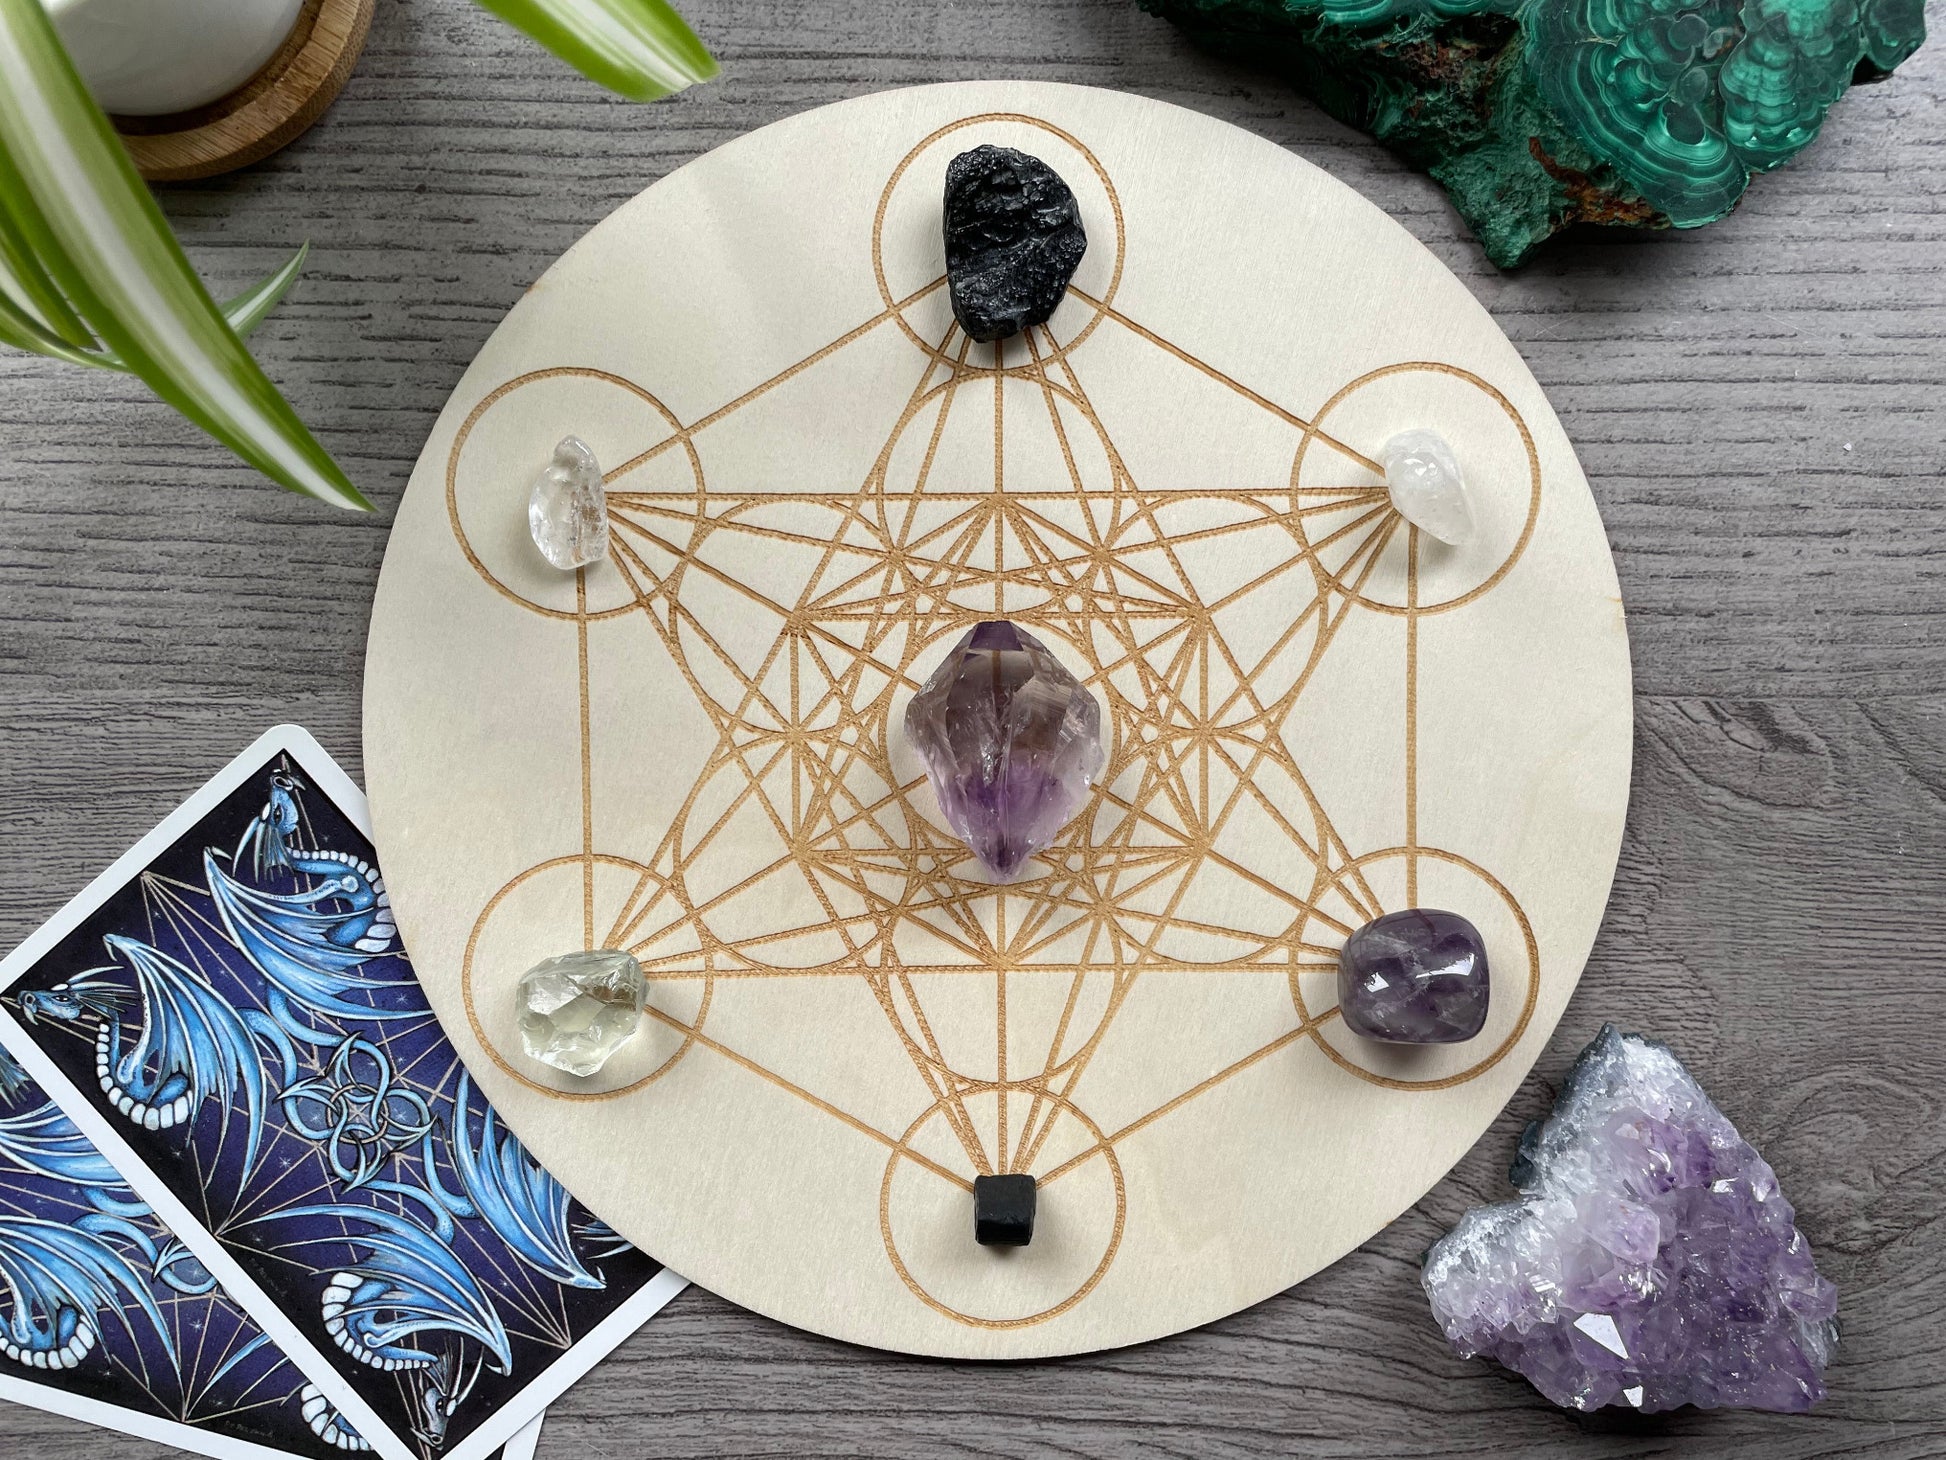 Pictured is a wood crystal grid board.